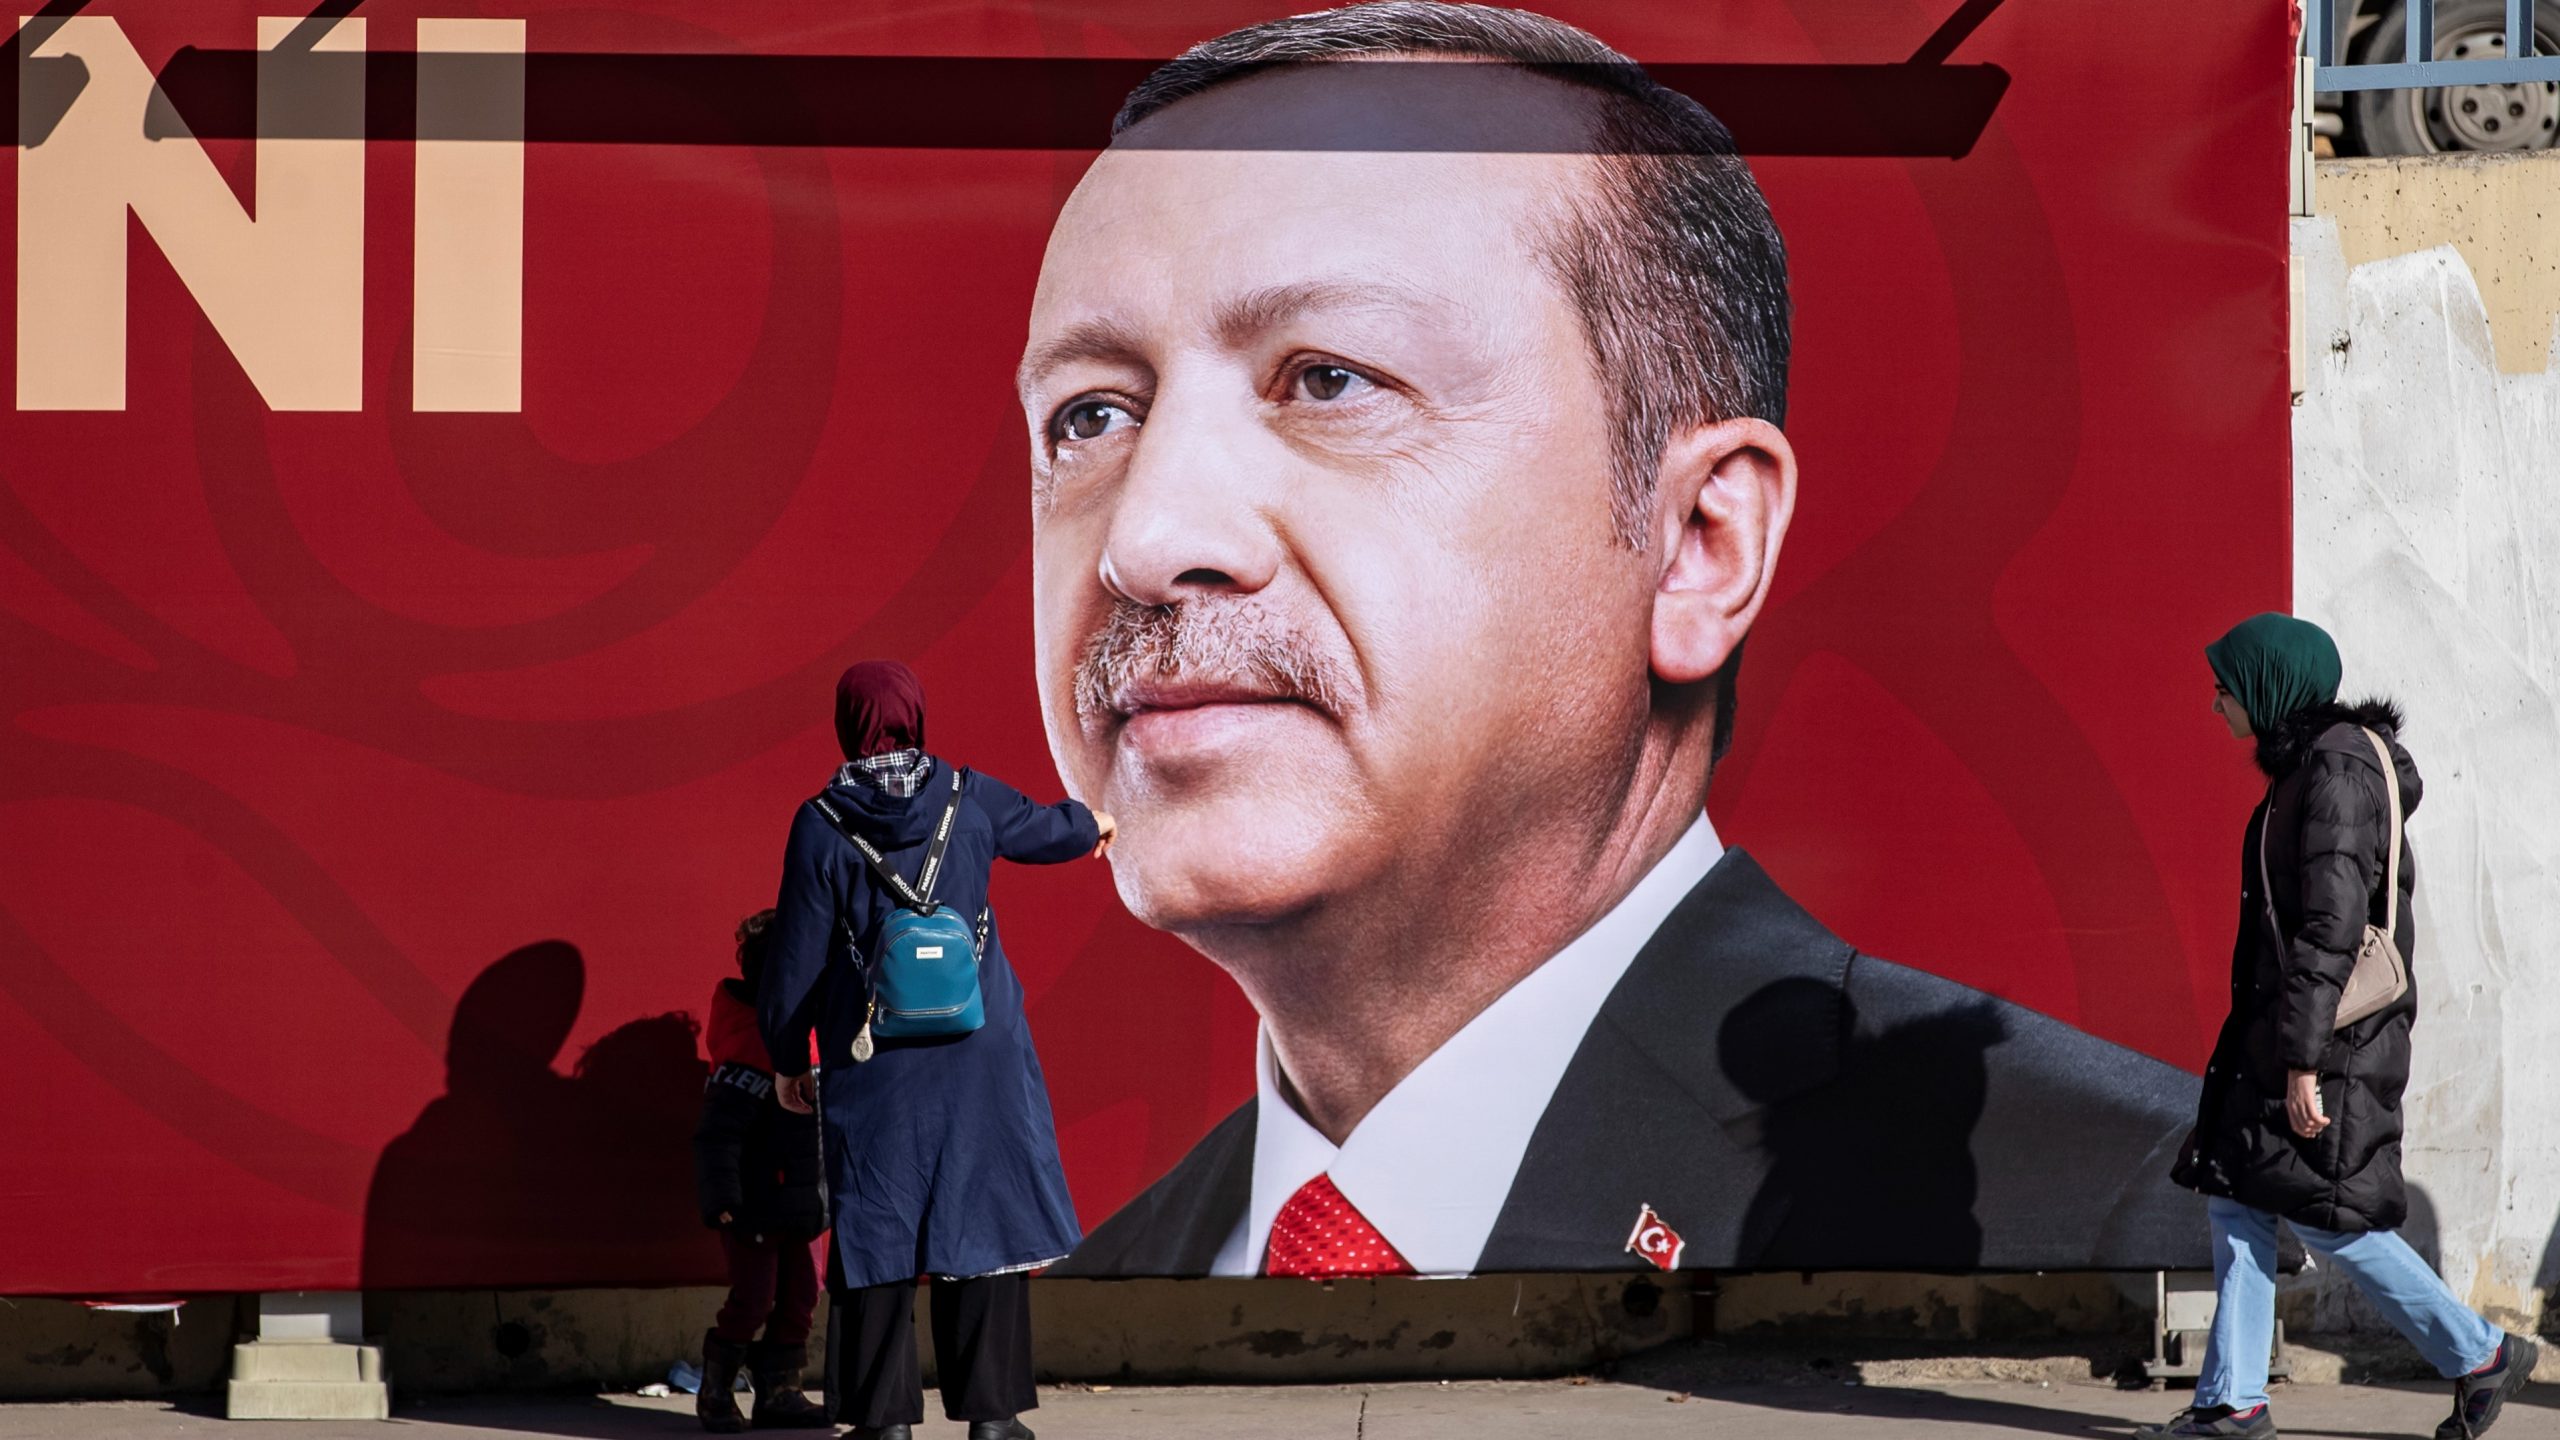 Turkey Accused of ‘Persecuting’ Critical Media Ahead of Key Elections